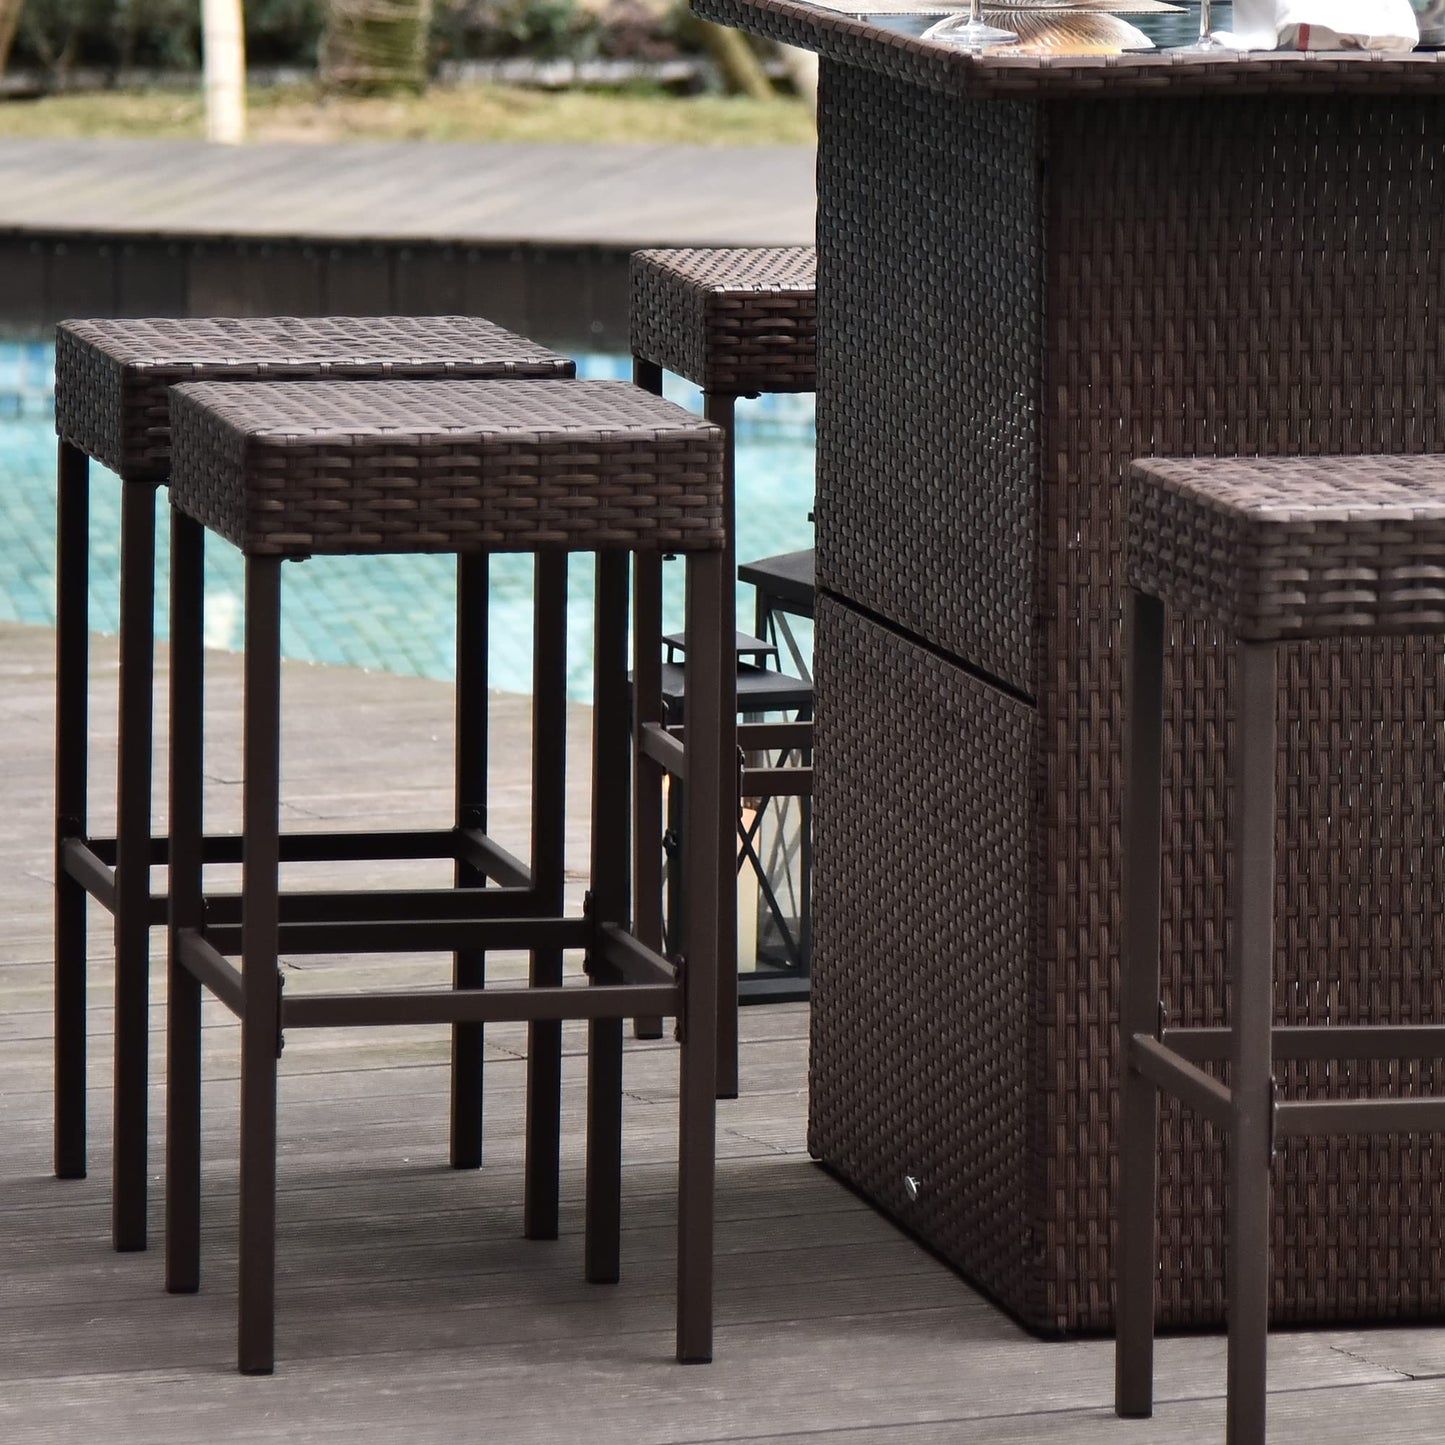 Outsunny 5 Pcs Rattan Wicker Bar Set with Glass Top Table and 2 Tier Storage Shelf, 1 Table and 4 Bar Stools for Outdoor, Patio, Garden, Poolside